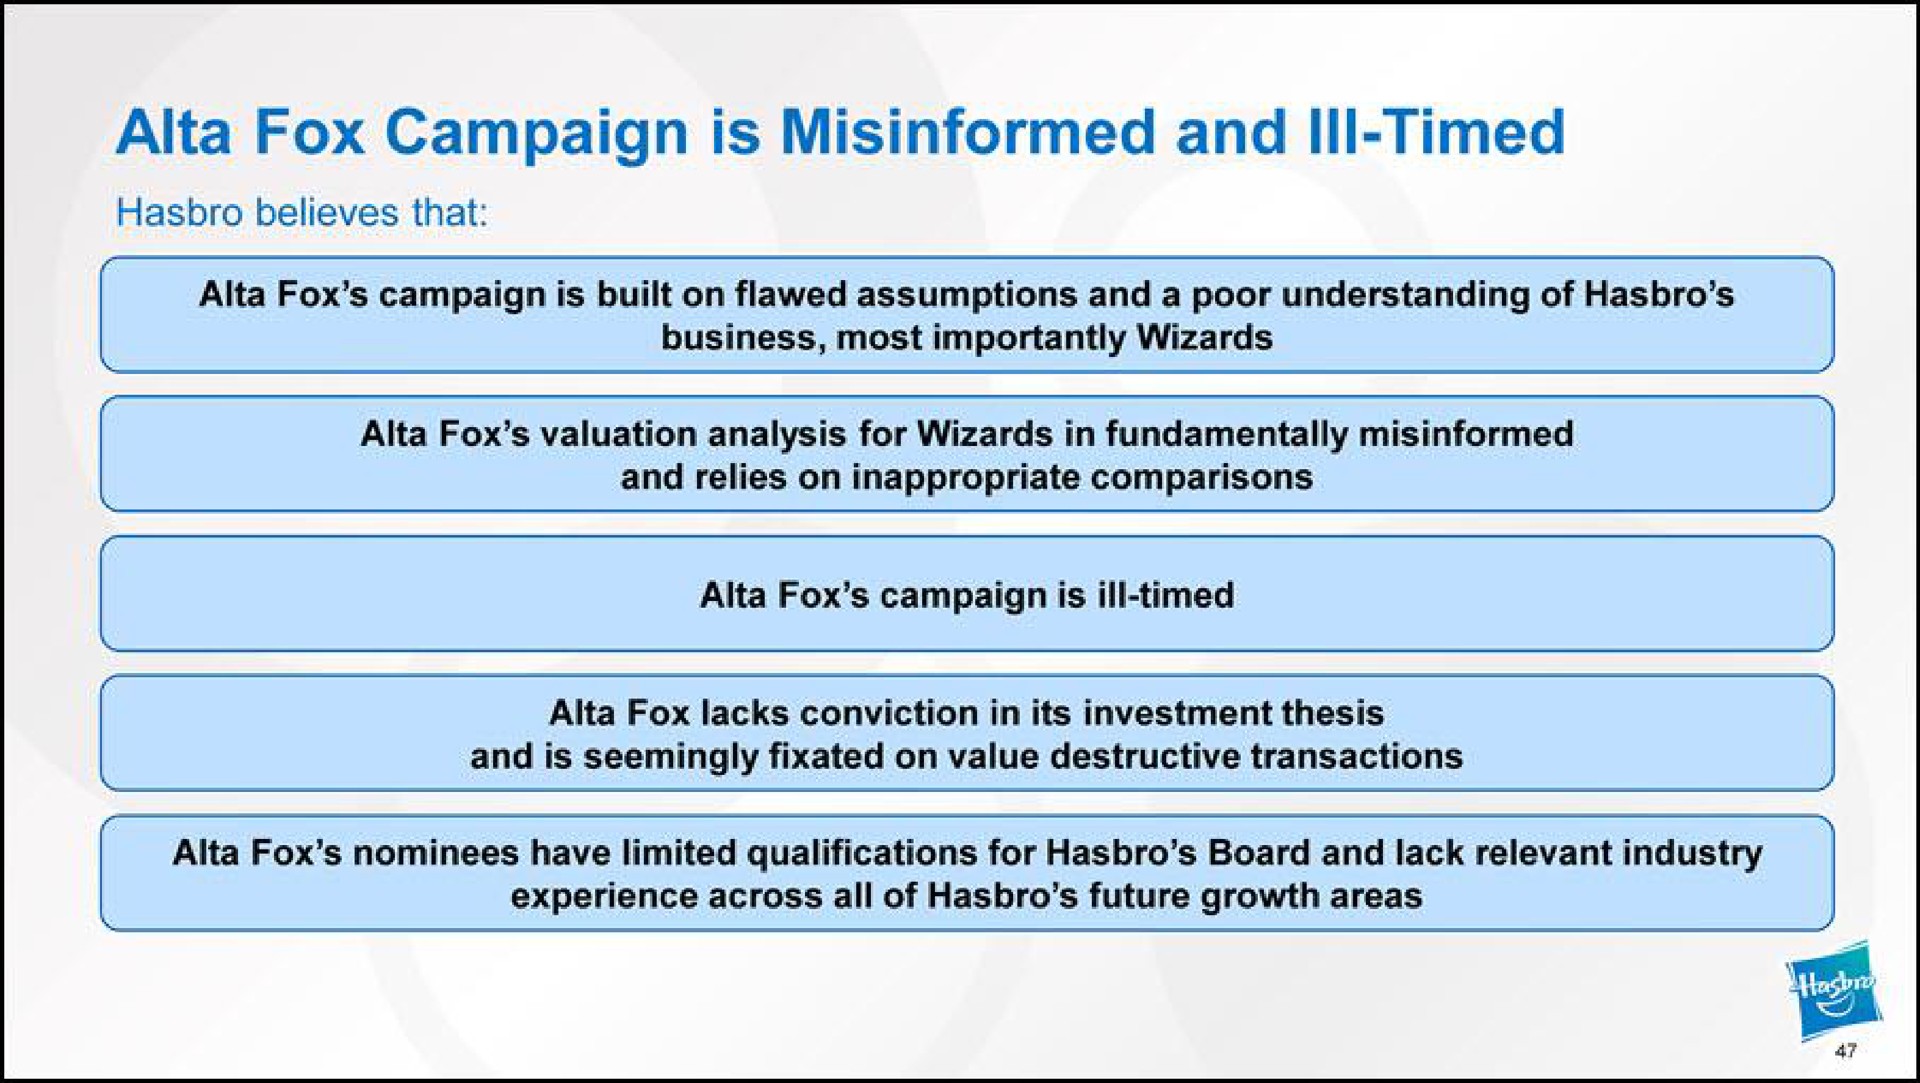 fox campaign is misinformed and ill timed believes that fox campaign is built on flawed assumptions and a poor understanding of business most importantly wizards fox valuation analysis for wizards in fundamentally misinformed and relies on inappropriate comparisons fox campaign is ill timed fox lacks conviction in its investment thesis and is seemingly fixated on value destructive transactions fox nominees have limited qualifications for board and lack relevant industry experience across all of future growth areas | Hasbro